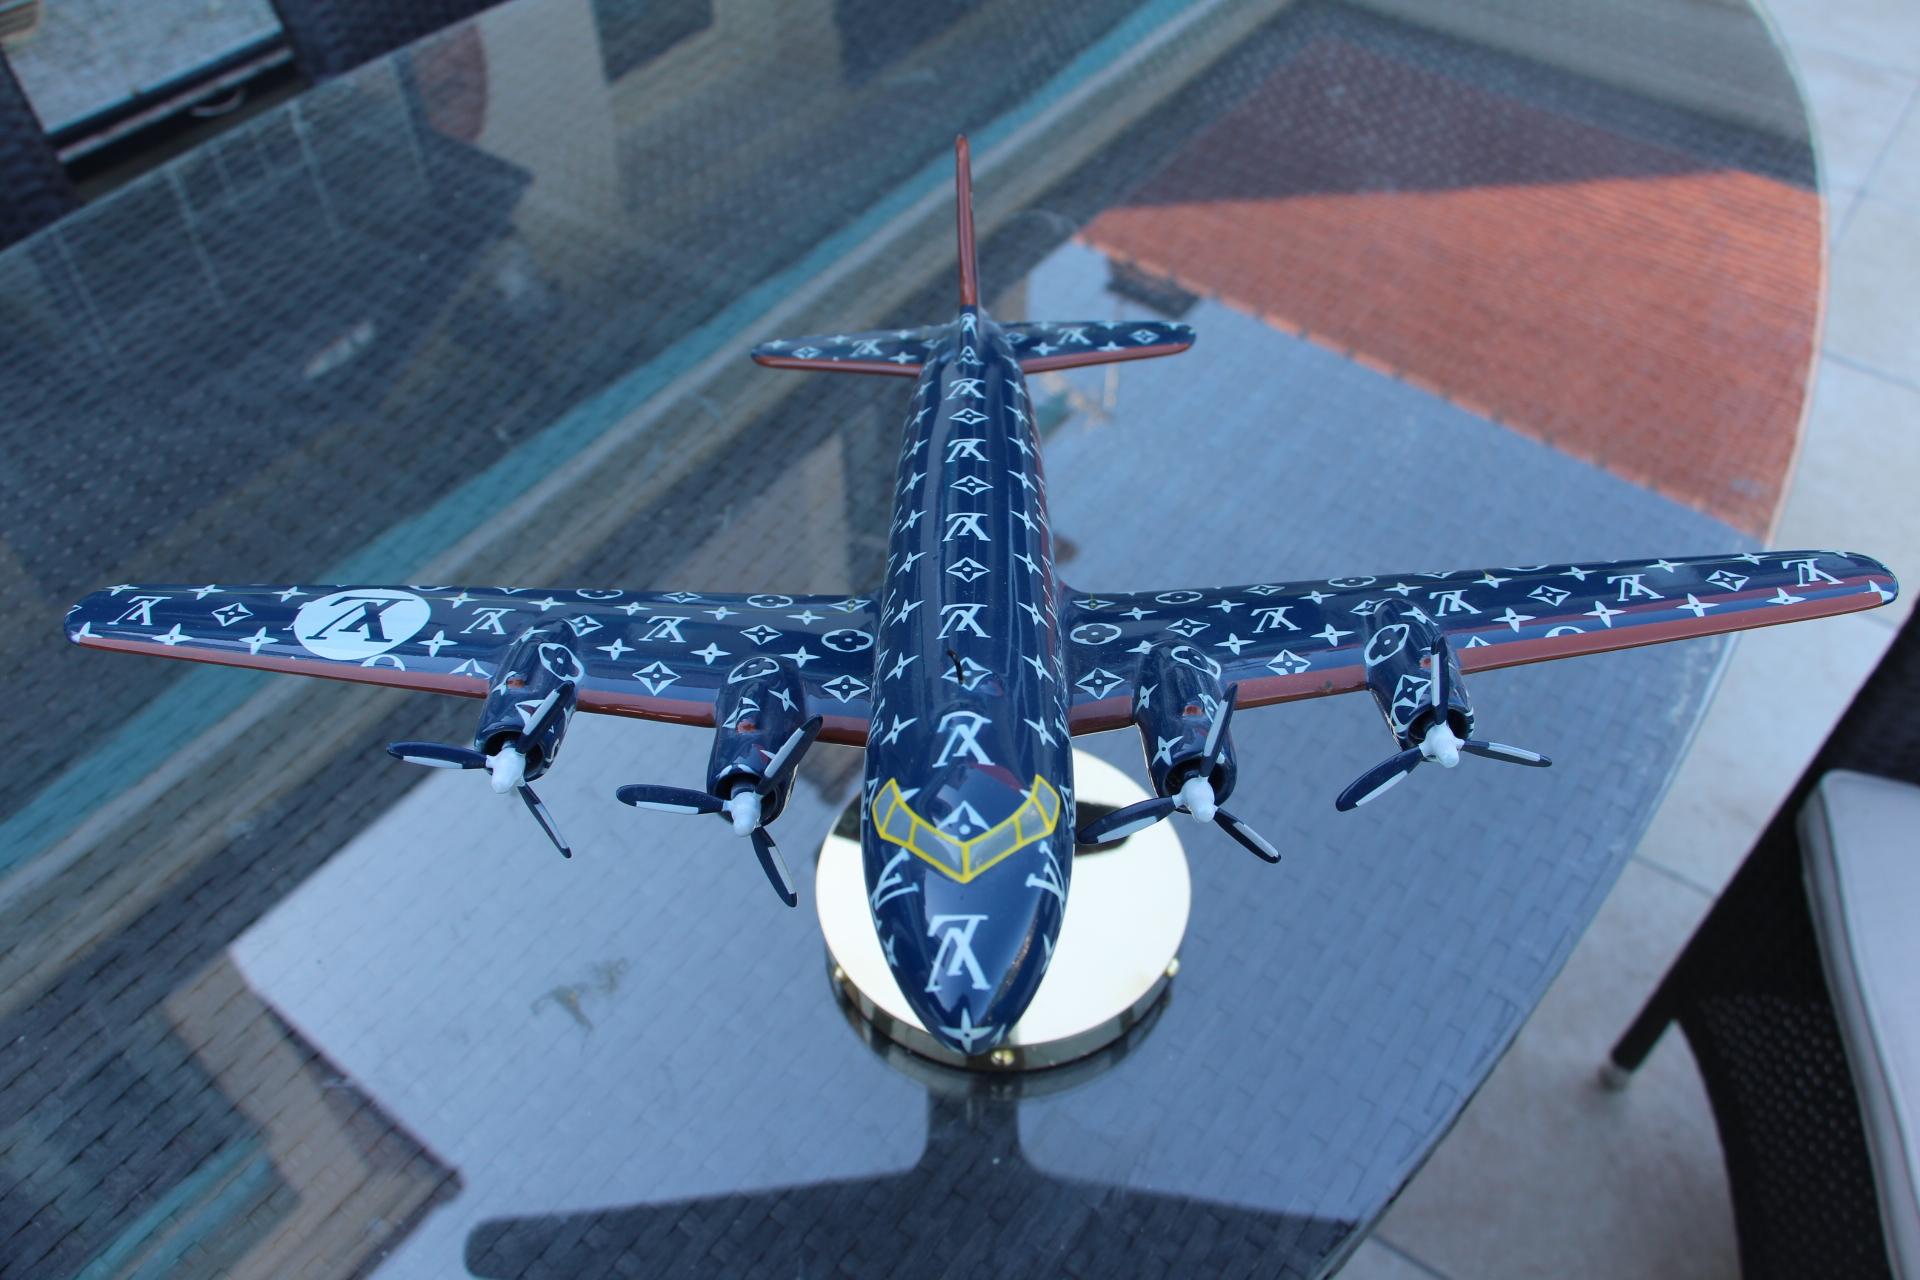 Louis Vuitton 1980 Shop Window Display Airplane Model  In Excellent Condition For Sale In Saint-Ouen, FR